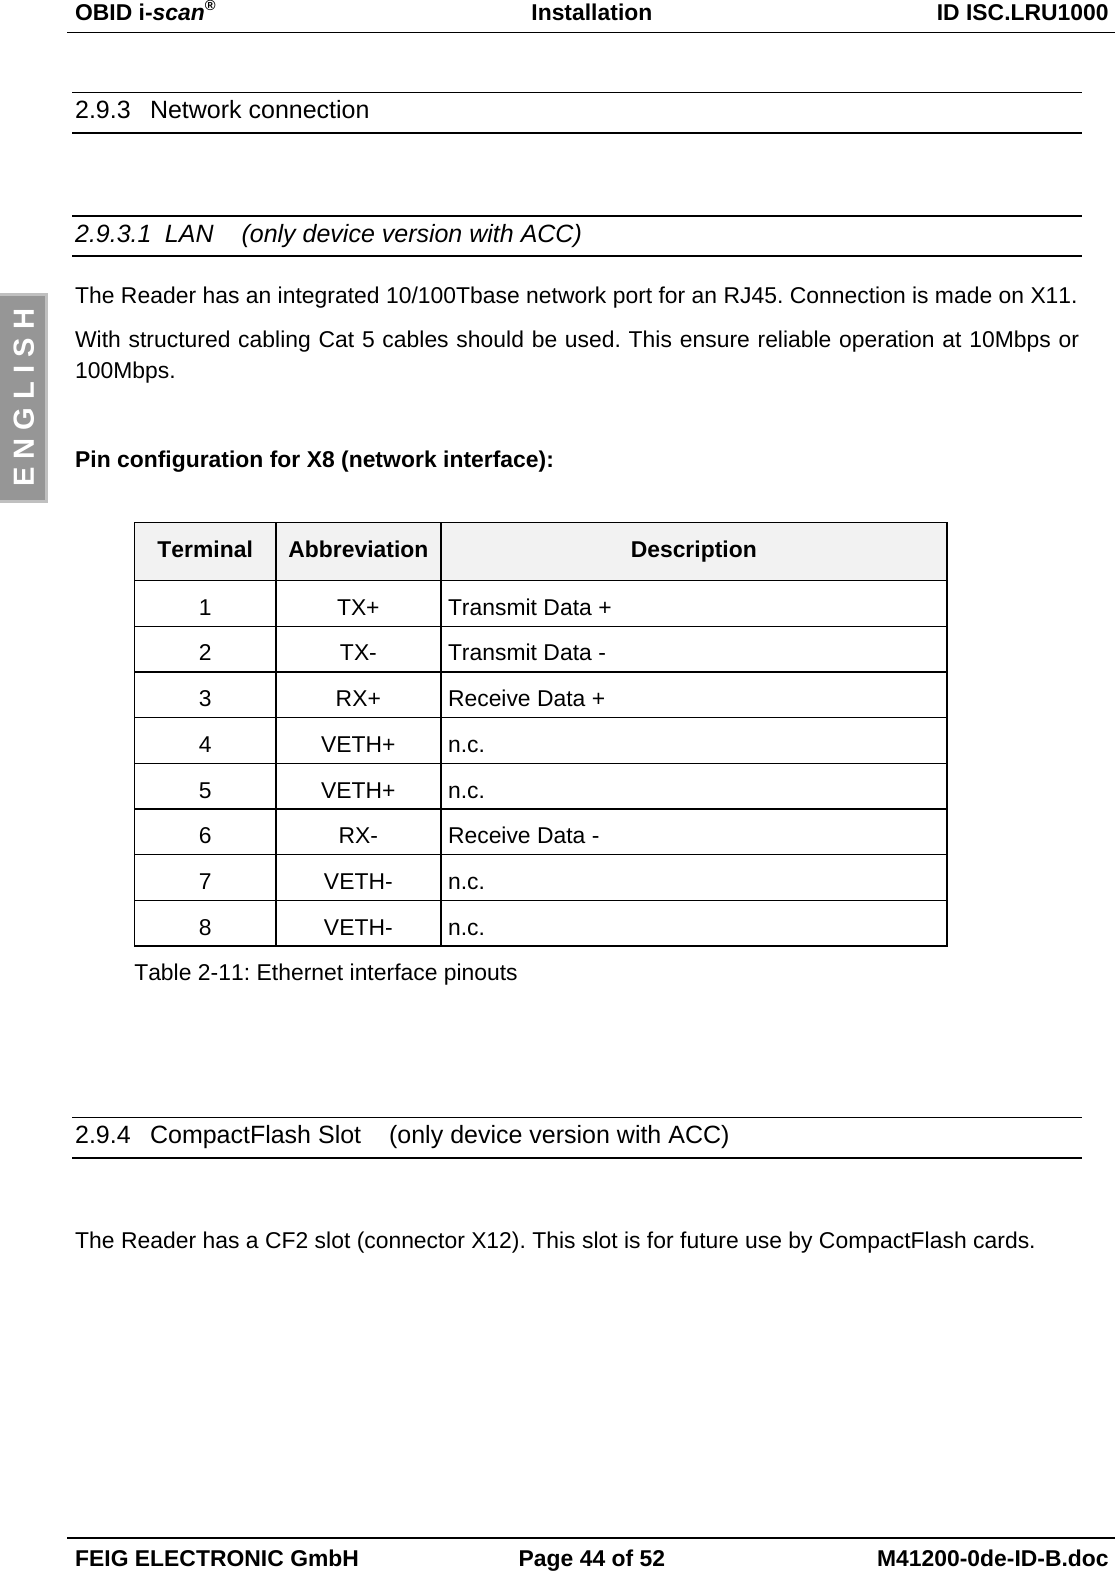 OBID i-scan®Installation ID ISC.LRU1000FEIG ELECTRONIC GmbH Page 44 of 52 M41200-0de-ID-B.docE N G L I S H2.9.3 Network connection2.9.3.1  LAN    (only device version with ACC)The Reader has an integrated 10/100Tbase network port for an RJ45. Connection is made on X11.With structured cabling Cat 5 cables should be used. This ensure reliable operation at 10Mbps or100Mbps.Pin configuration for X8 (network interface):Terminal Abbreviation Description1 TX+ Transmit Data +2 TX- Transmit Data -3 RX+ Receive Data +4 VETH+ n.c.5 VETH+ n.c.6 RX- Receive Data -7 VETH- n.c.8 VETH- n.c.Table 2-11: Ethernet interface pinouts2.9.4  CompactFlash Slot    (only device version with ACC)The Reader has a CF2 slot (connector X12). This slot is for future use by CompactFlash cards.